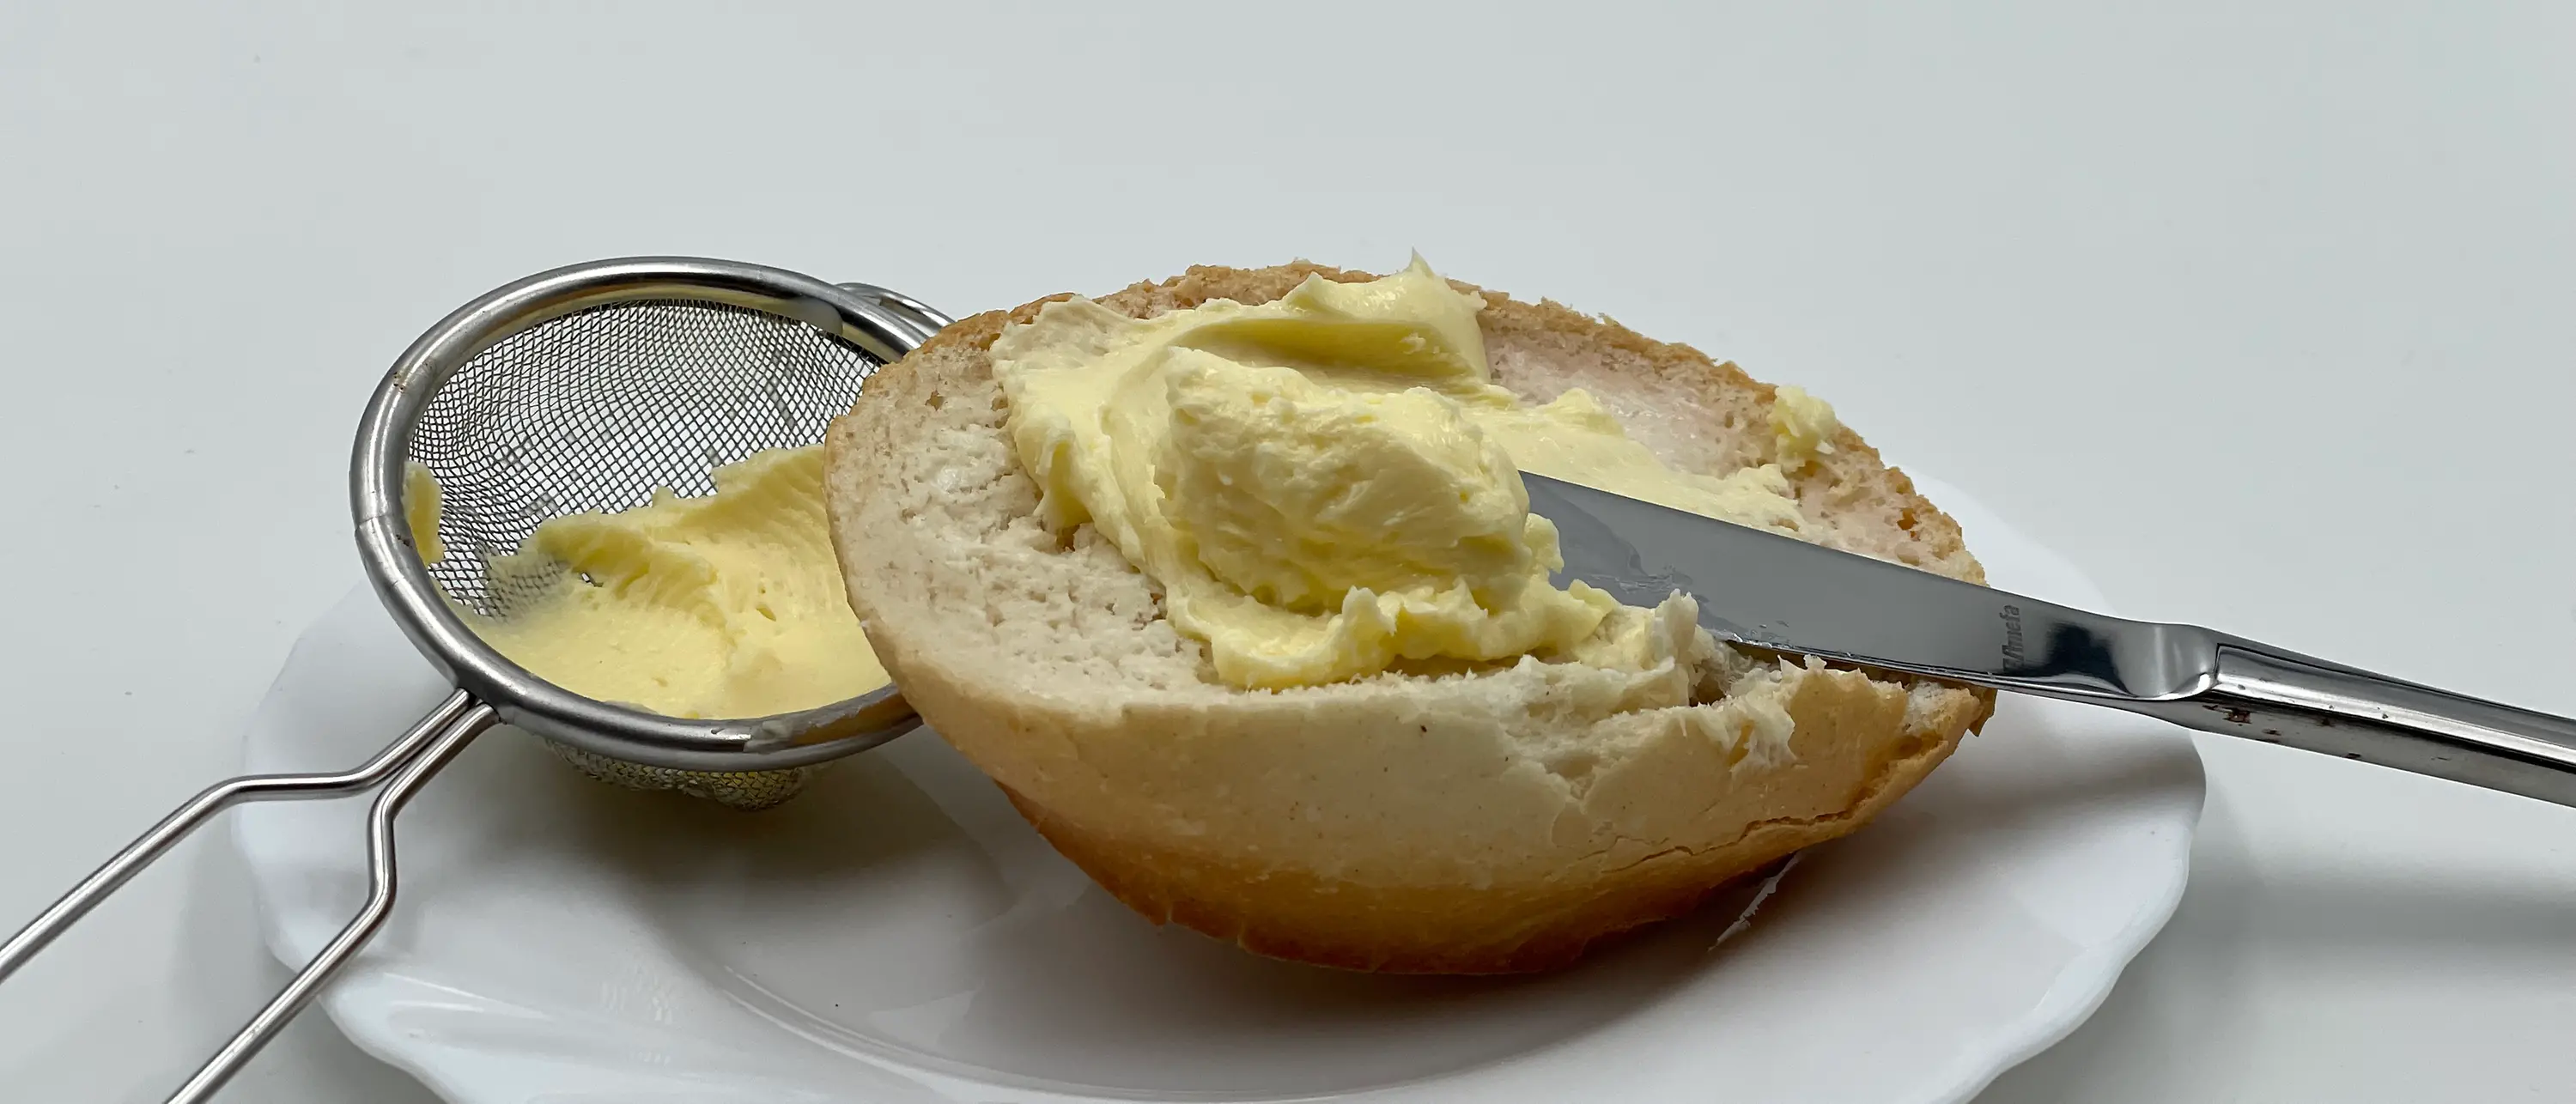 Buttered bun with knife on a plate next to a sieve with butter